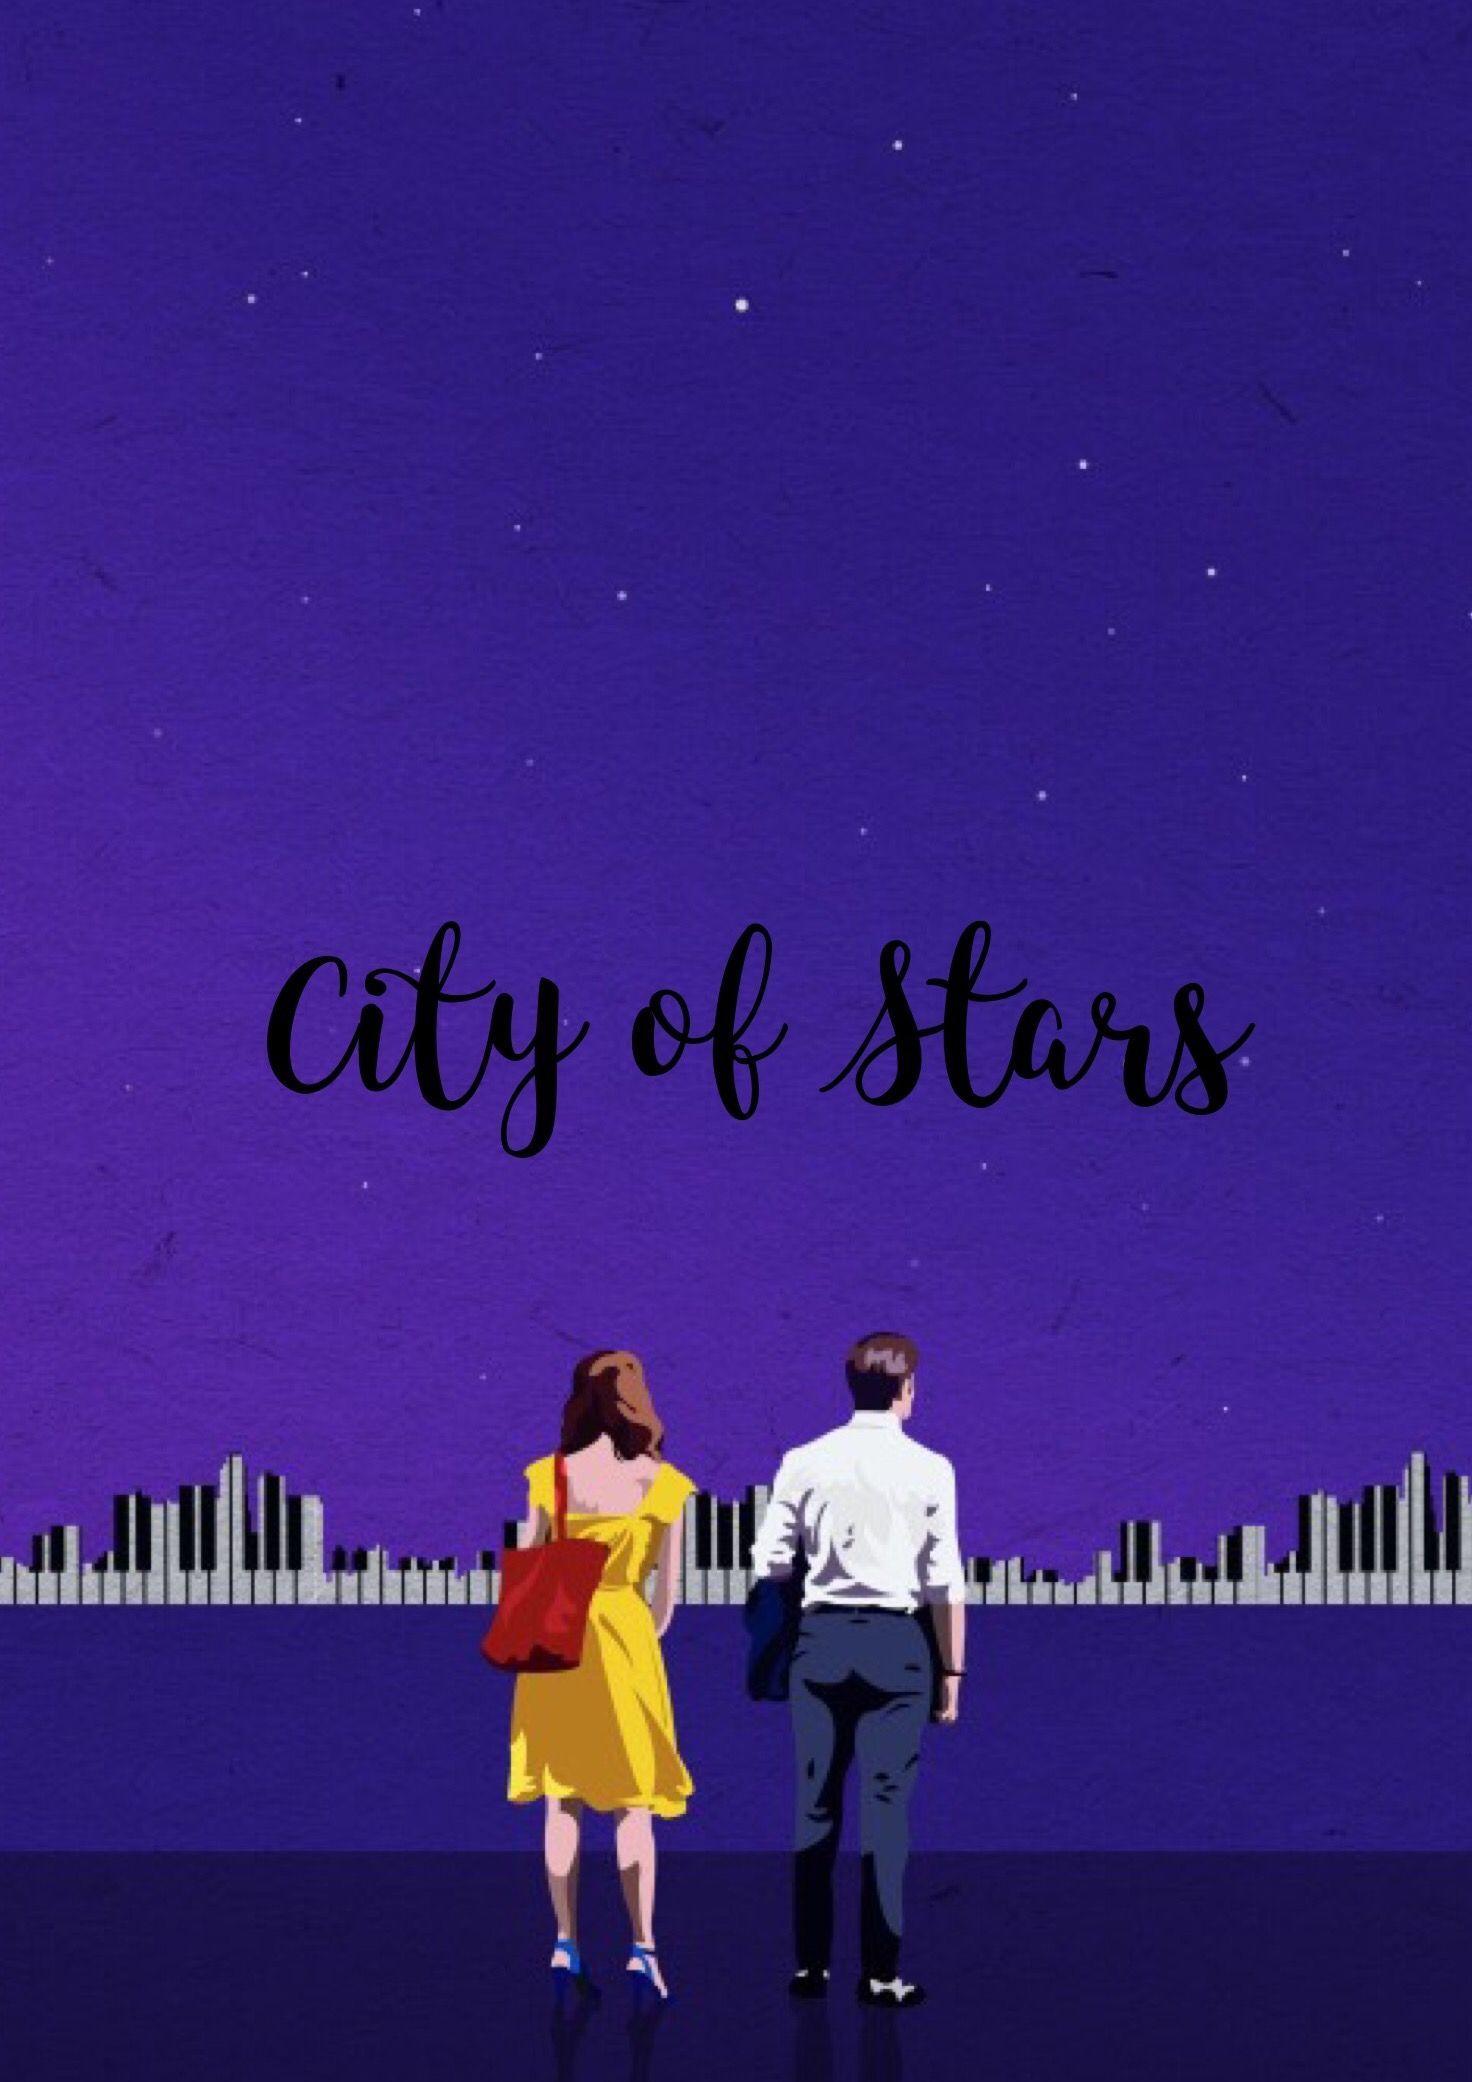 City Of Stars wallpaper by Rayee07 - Download on ZEDGE™